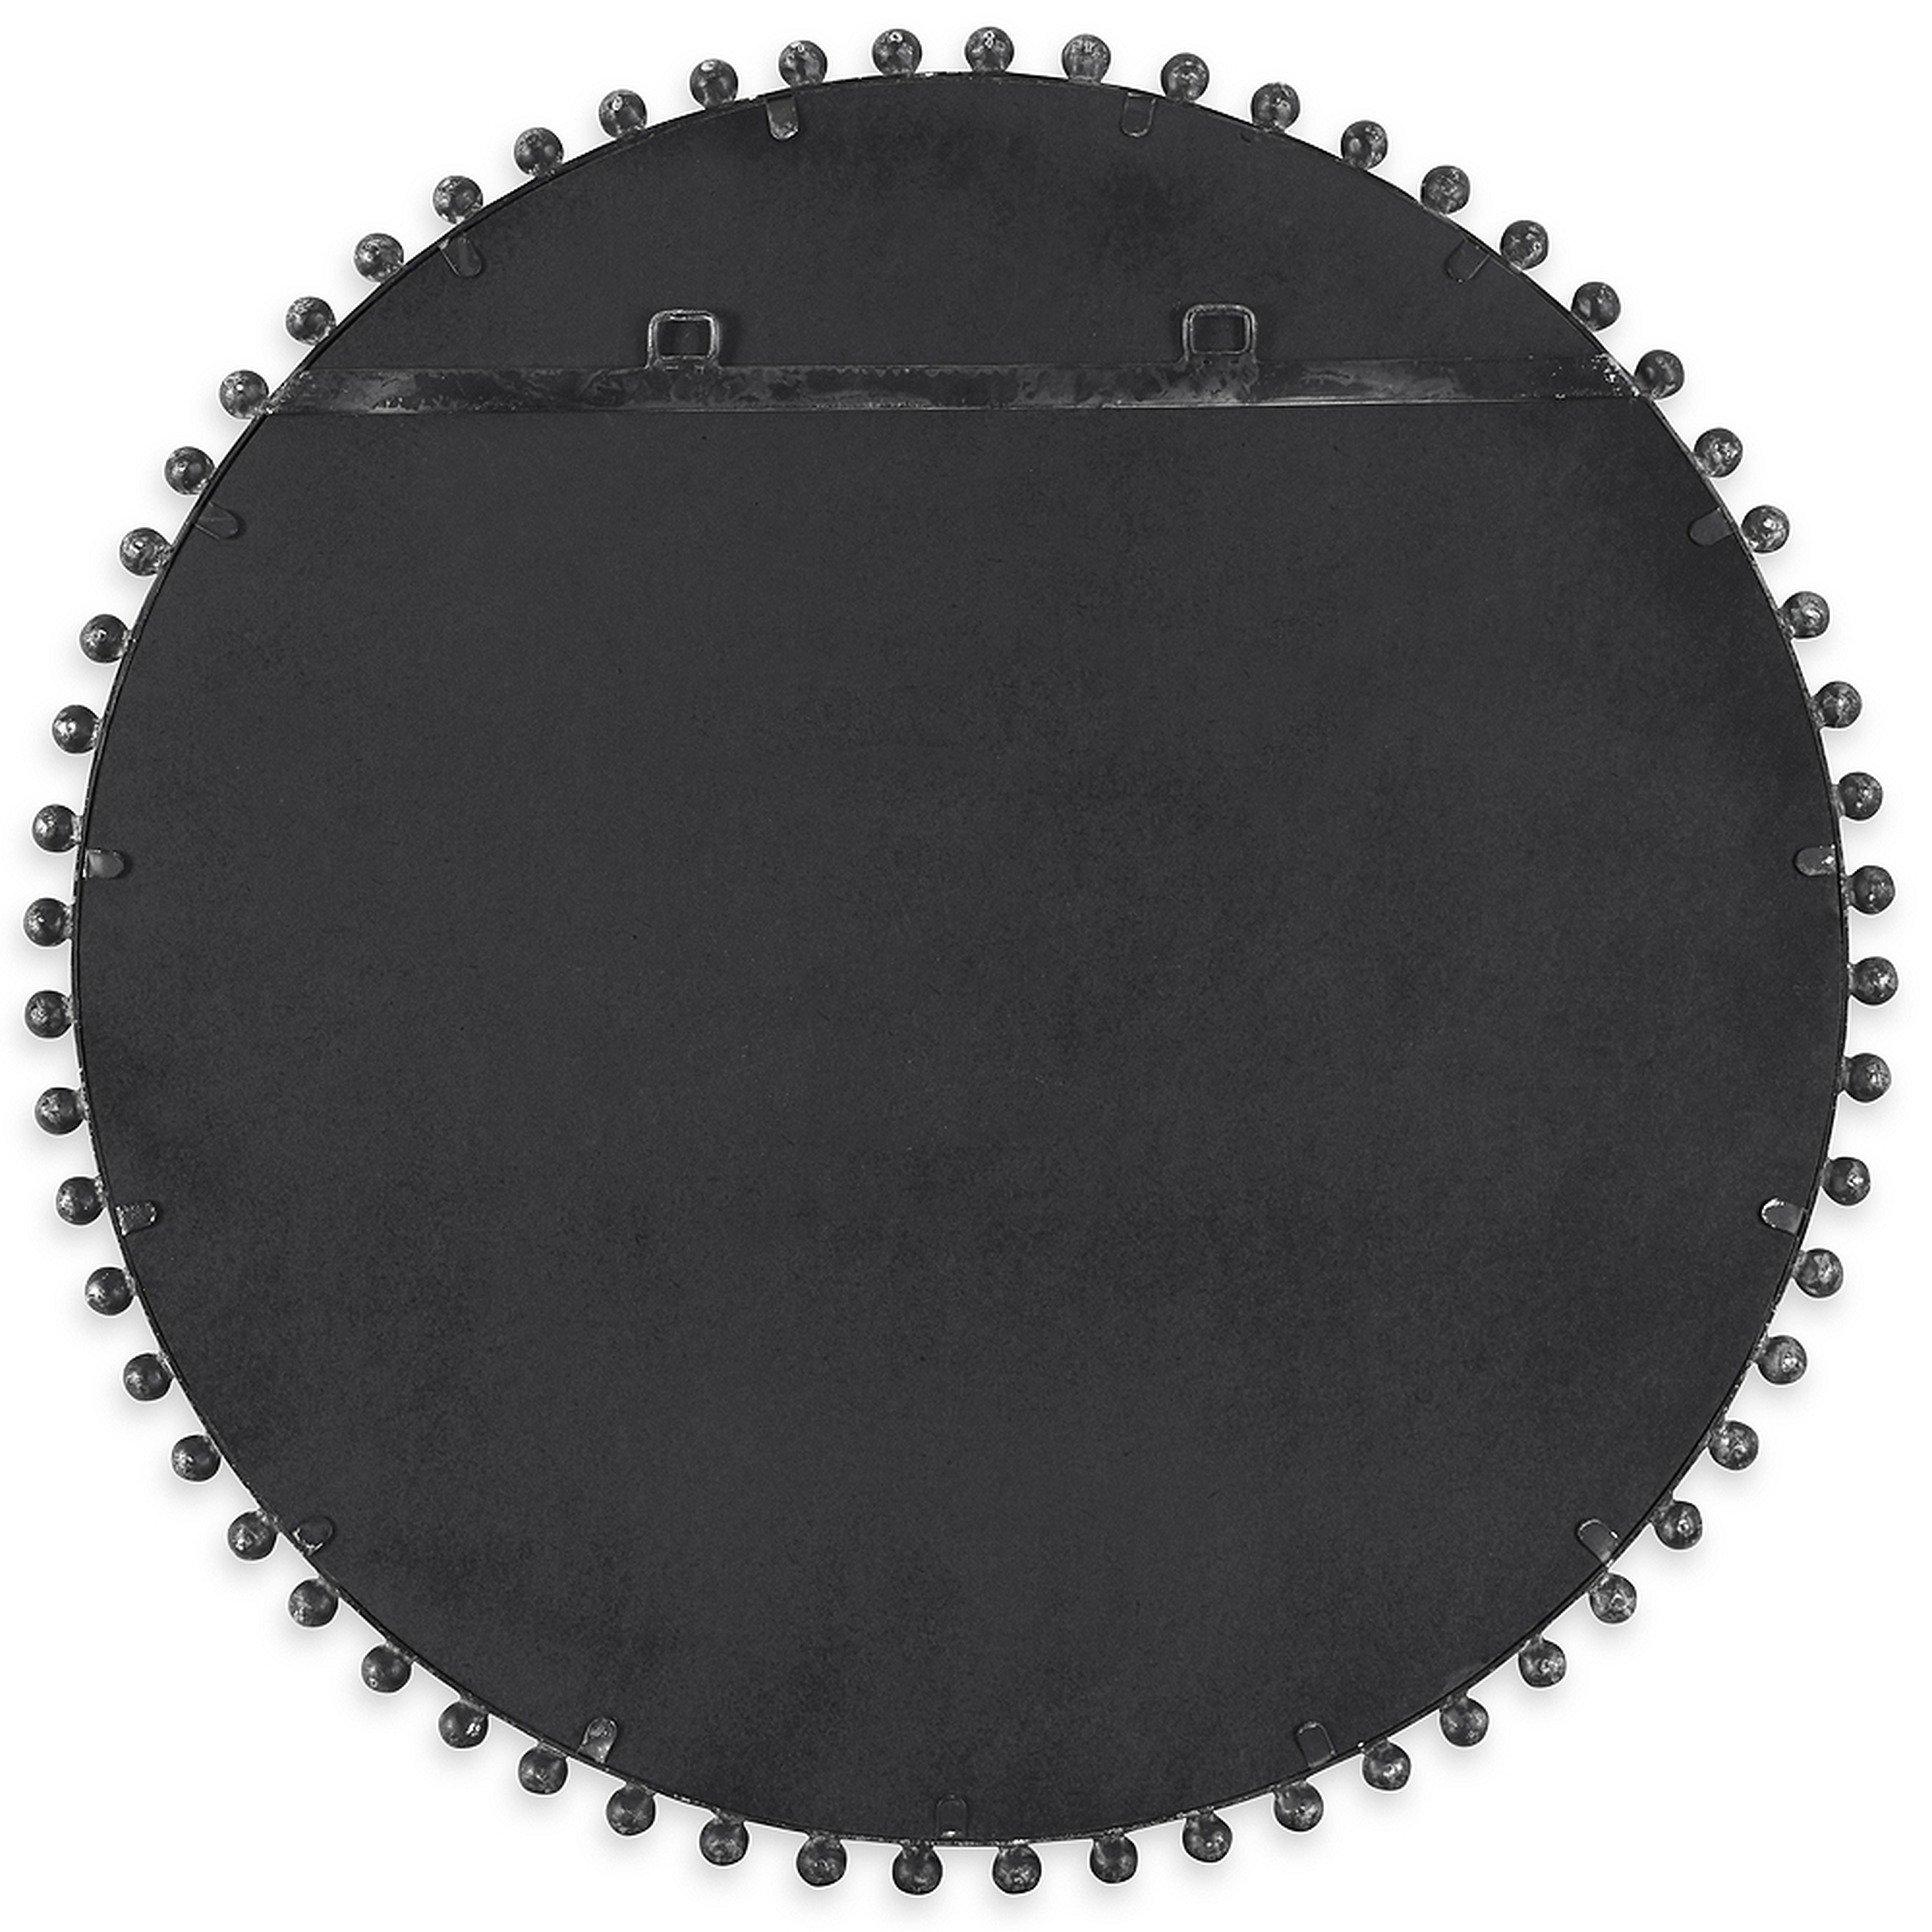 Uttermost Taza Distressed Black 32" Round Wall Mirror - Style # 94K09 - Lamps Plus